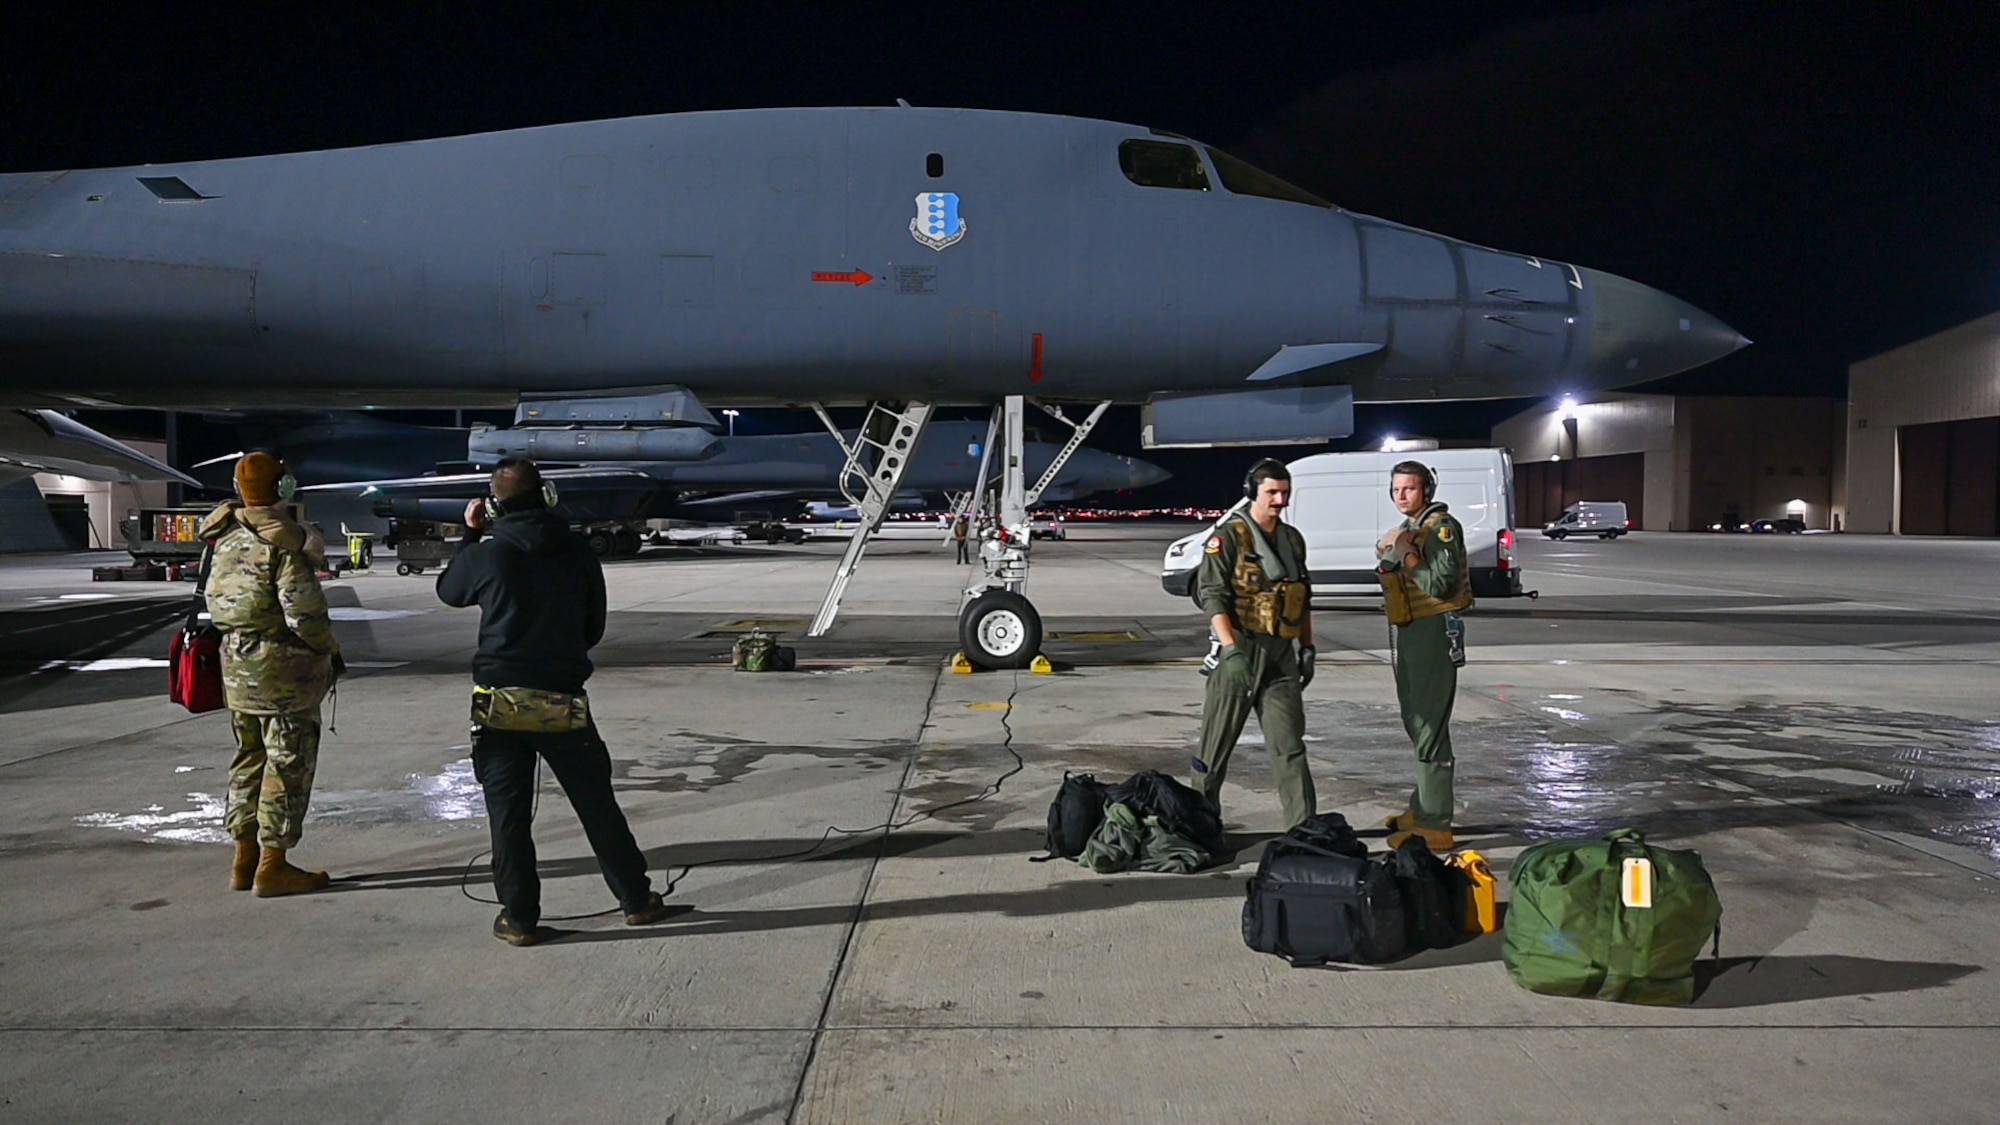 Aircrew from the 37th Bomb Squadron load a B-1B Lancer for a CONUS-to-CONUS (C2C) mission at Ellsworth Air Force Base, South Dakota, Jan. 9, 2023. The B-1B is a long-range, multi-role bomber that carries the largest payload of precision guided and unguided munitions in the Air Force inventory. (U.S. Air Force photo by Airman 1st Class Adam Olson)